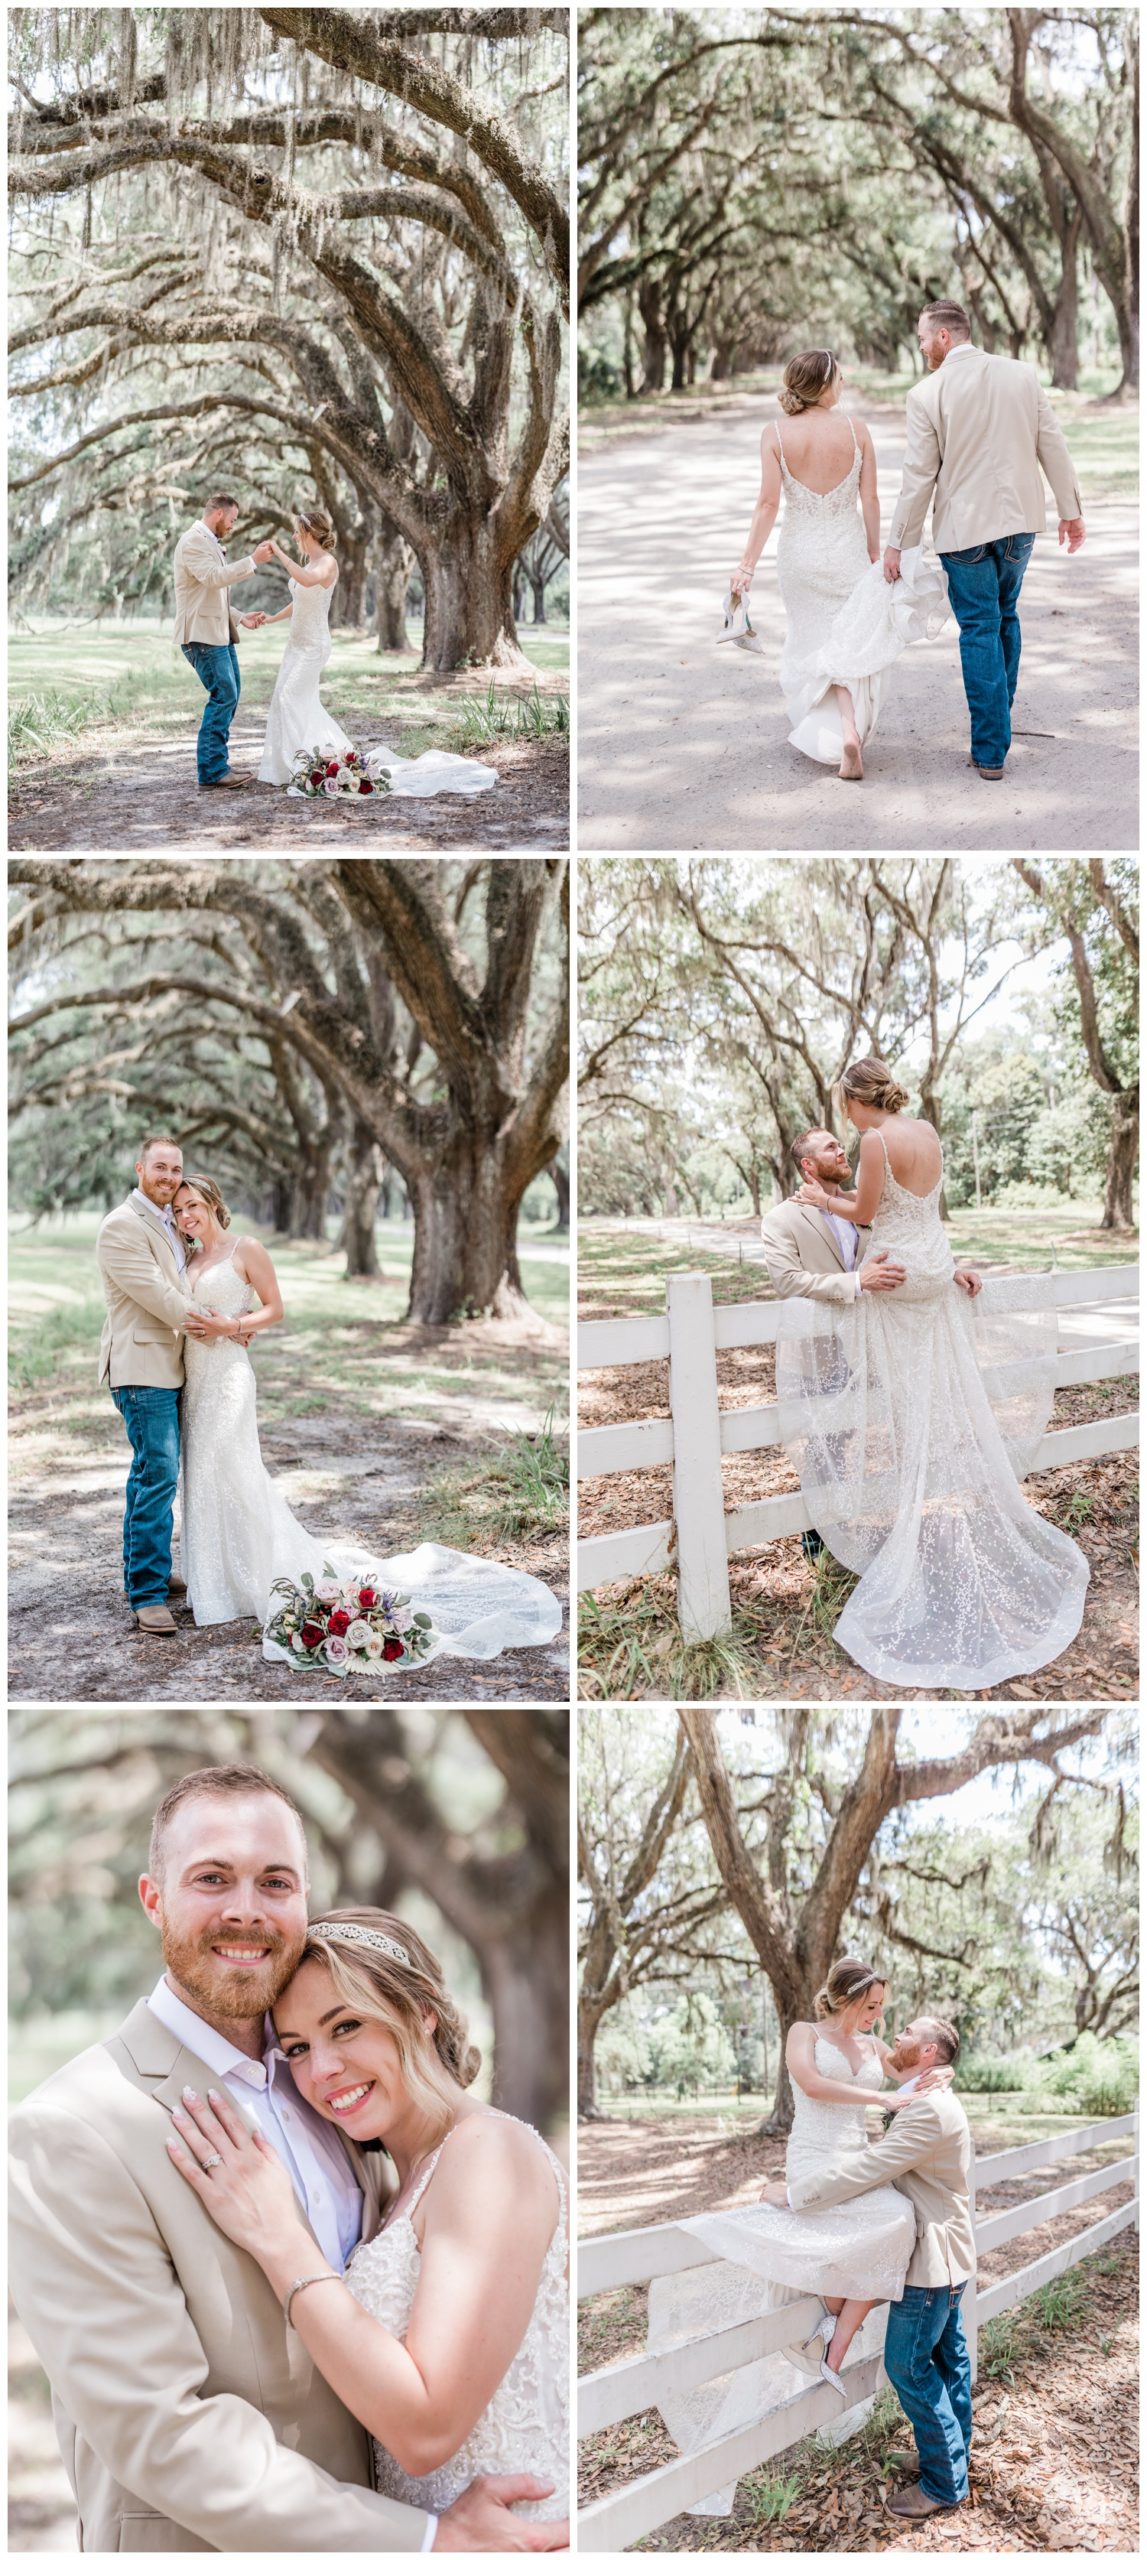 Couples photos at Wormsloe - apt b photography